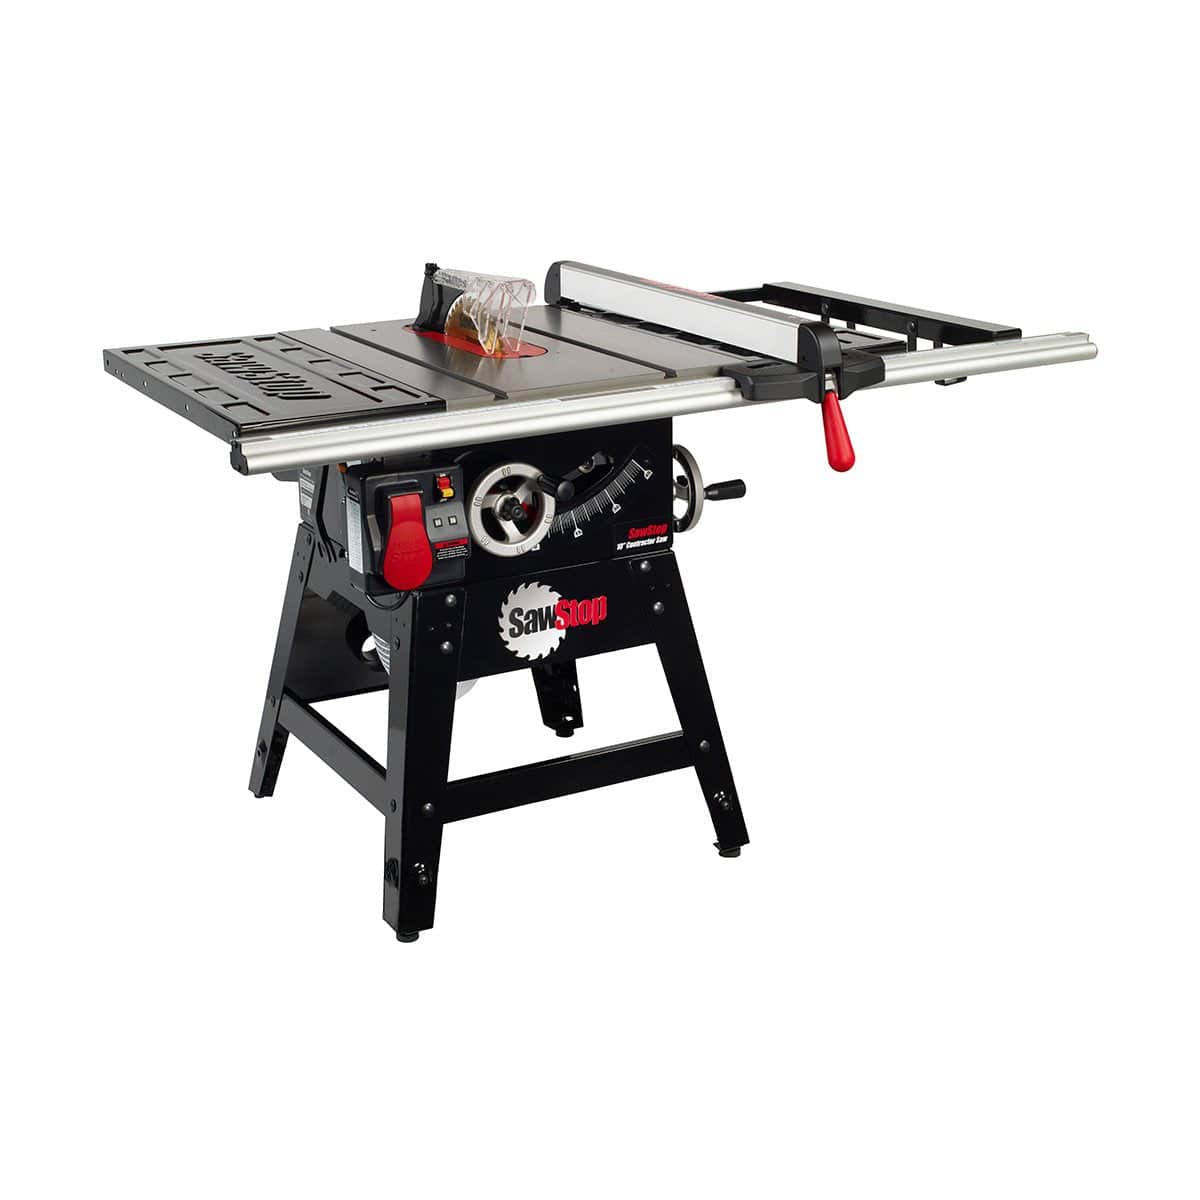 SawStop CNS175-SFA30 Table Saw 10" 1.75HP Contractors Saw 30" Fence